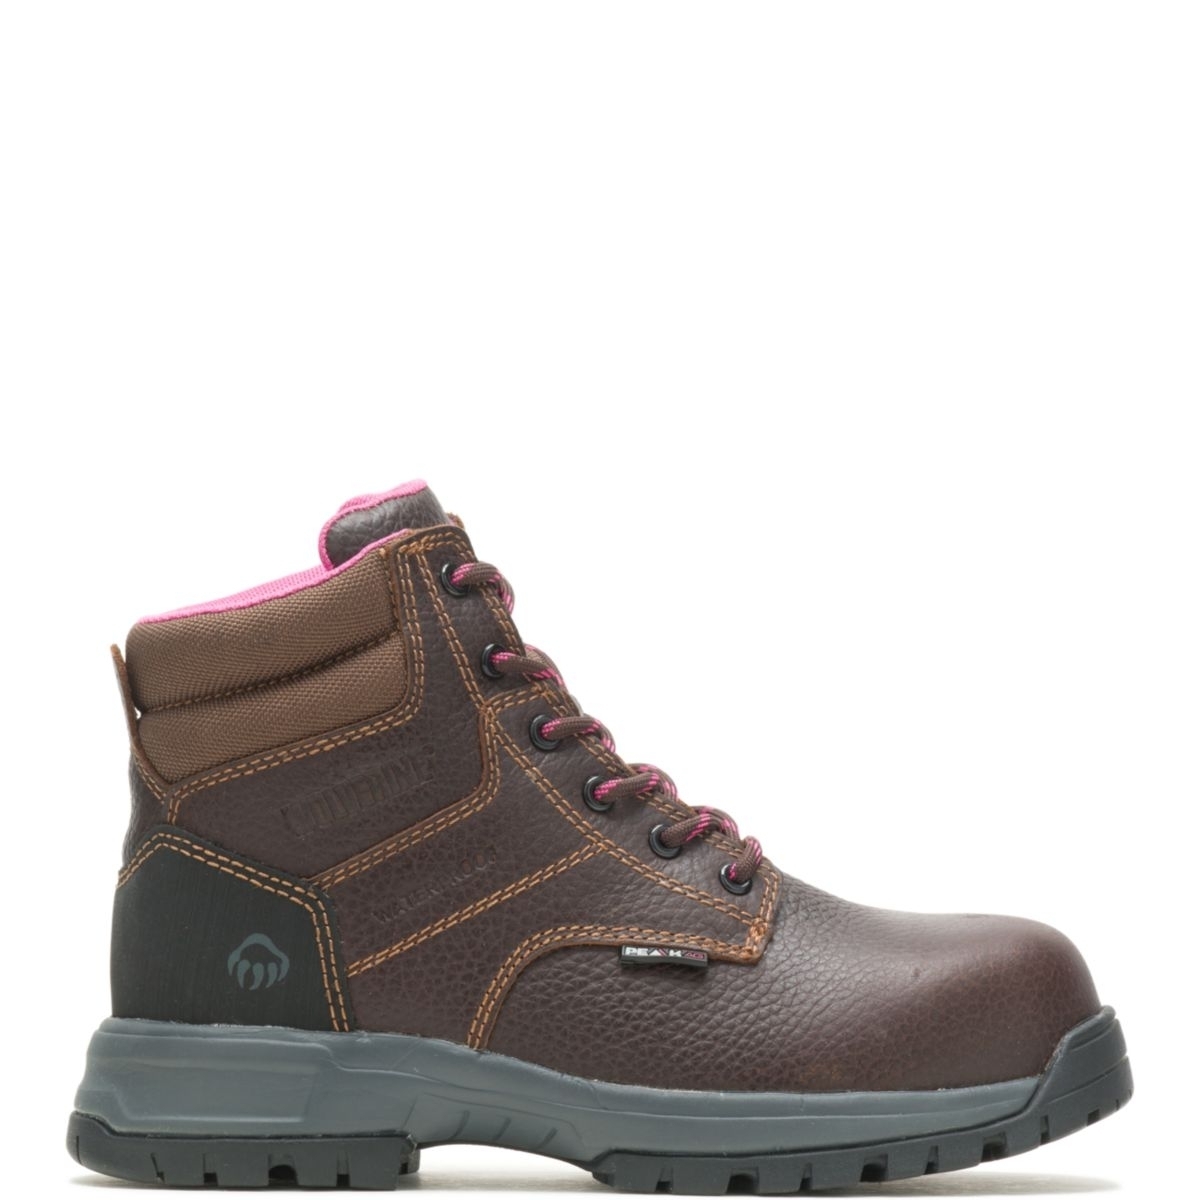 WOLVERINE Women's Piper Composite Toe Work Boot Brown - W10180 BROWN - BROWN, 6 Wide